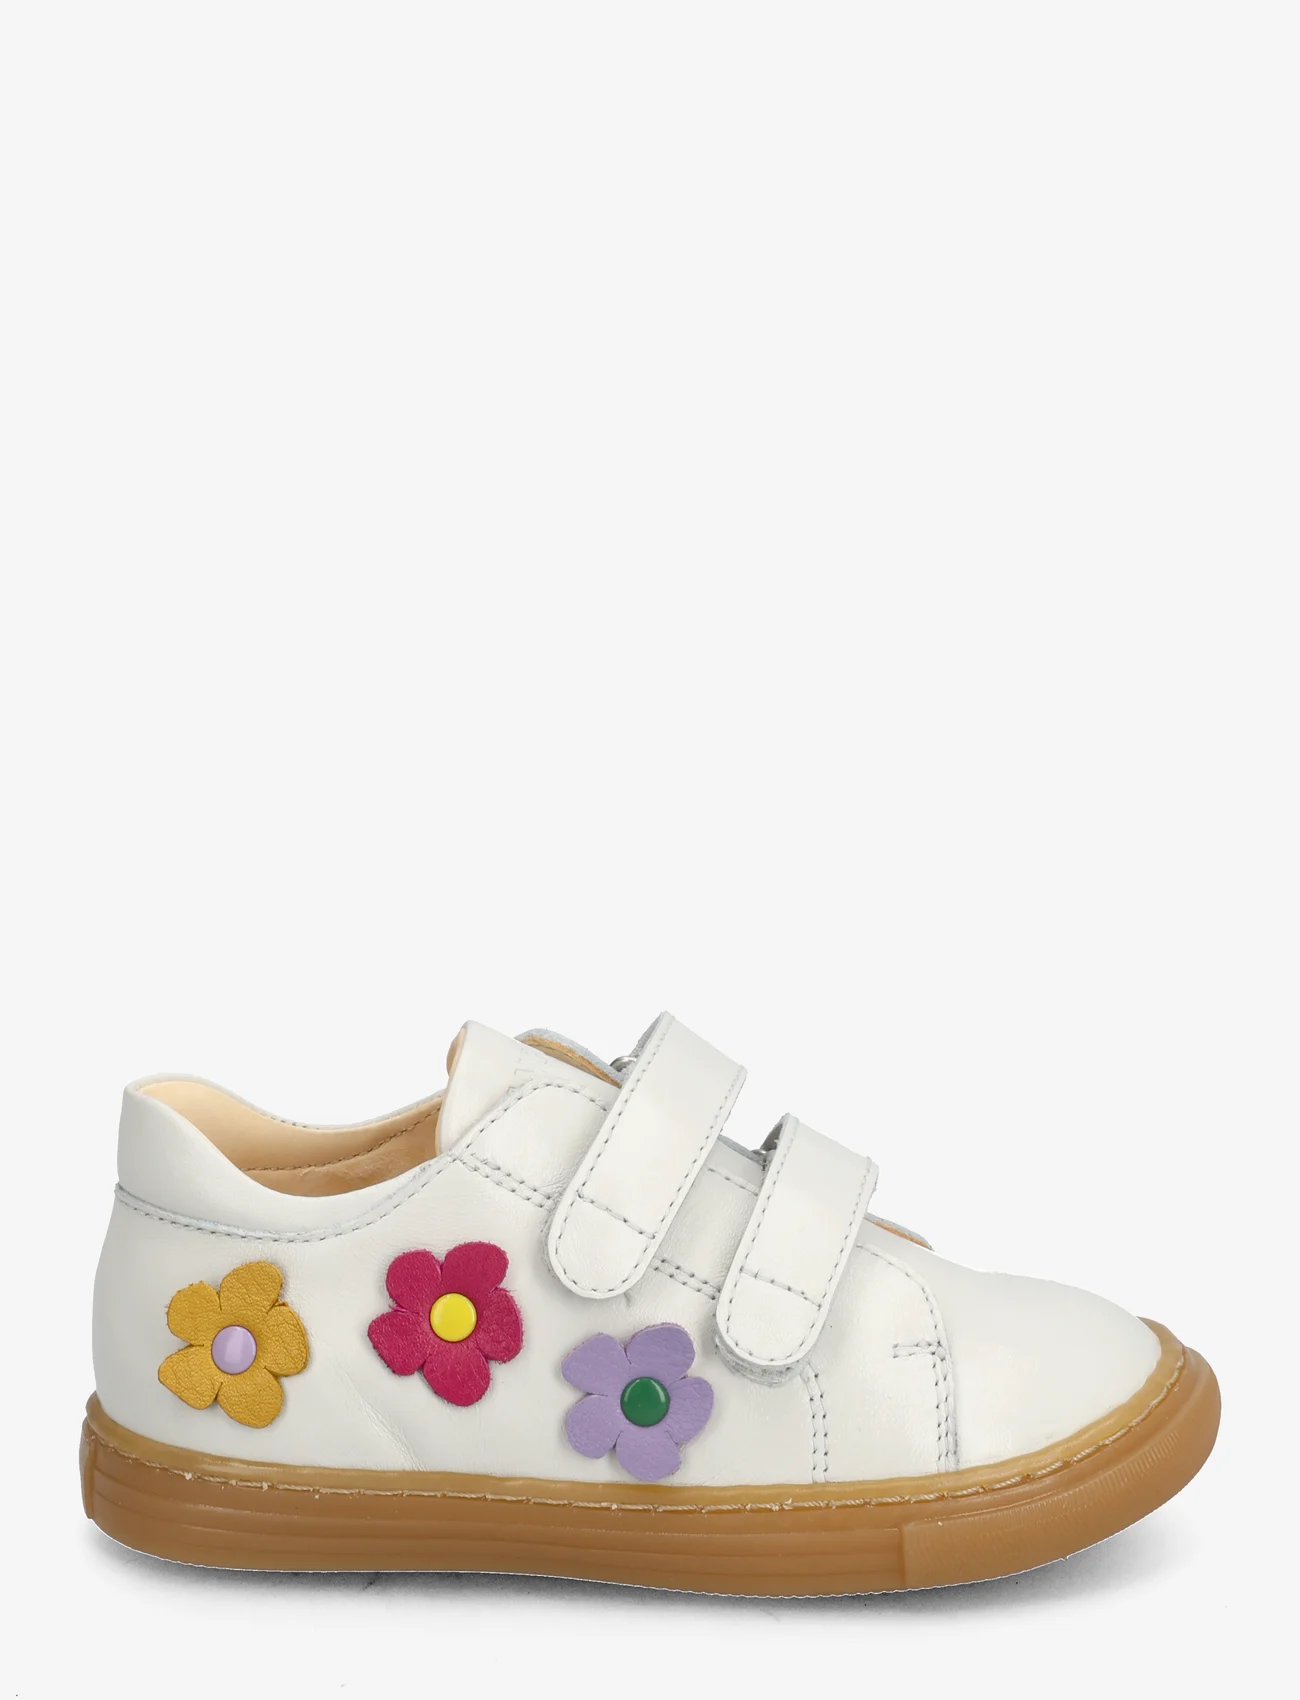 ANGULUS - Shoes - flat - with velcro - zomerkoopjes - 1493/a001 off white/flowers - 1